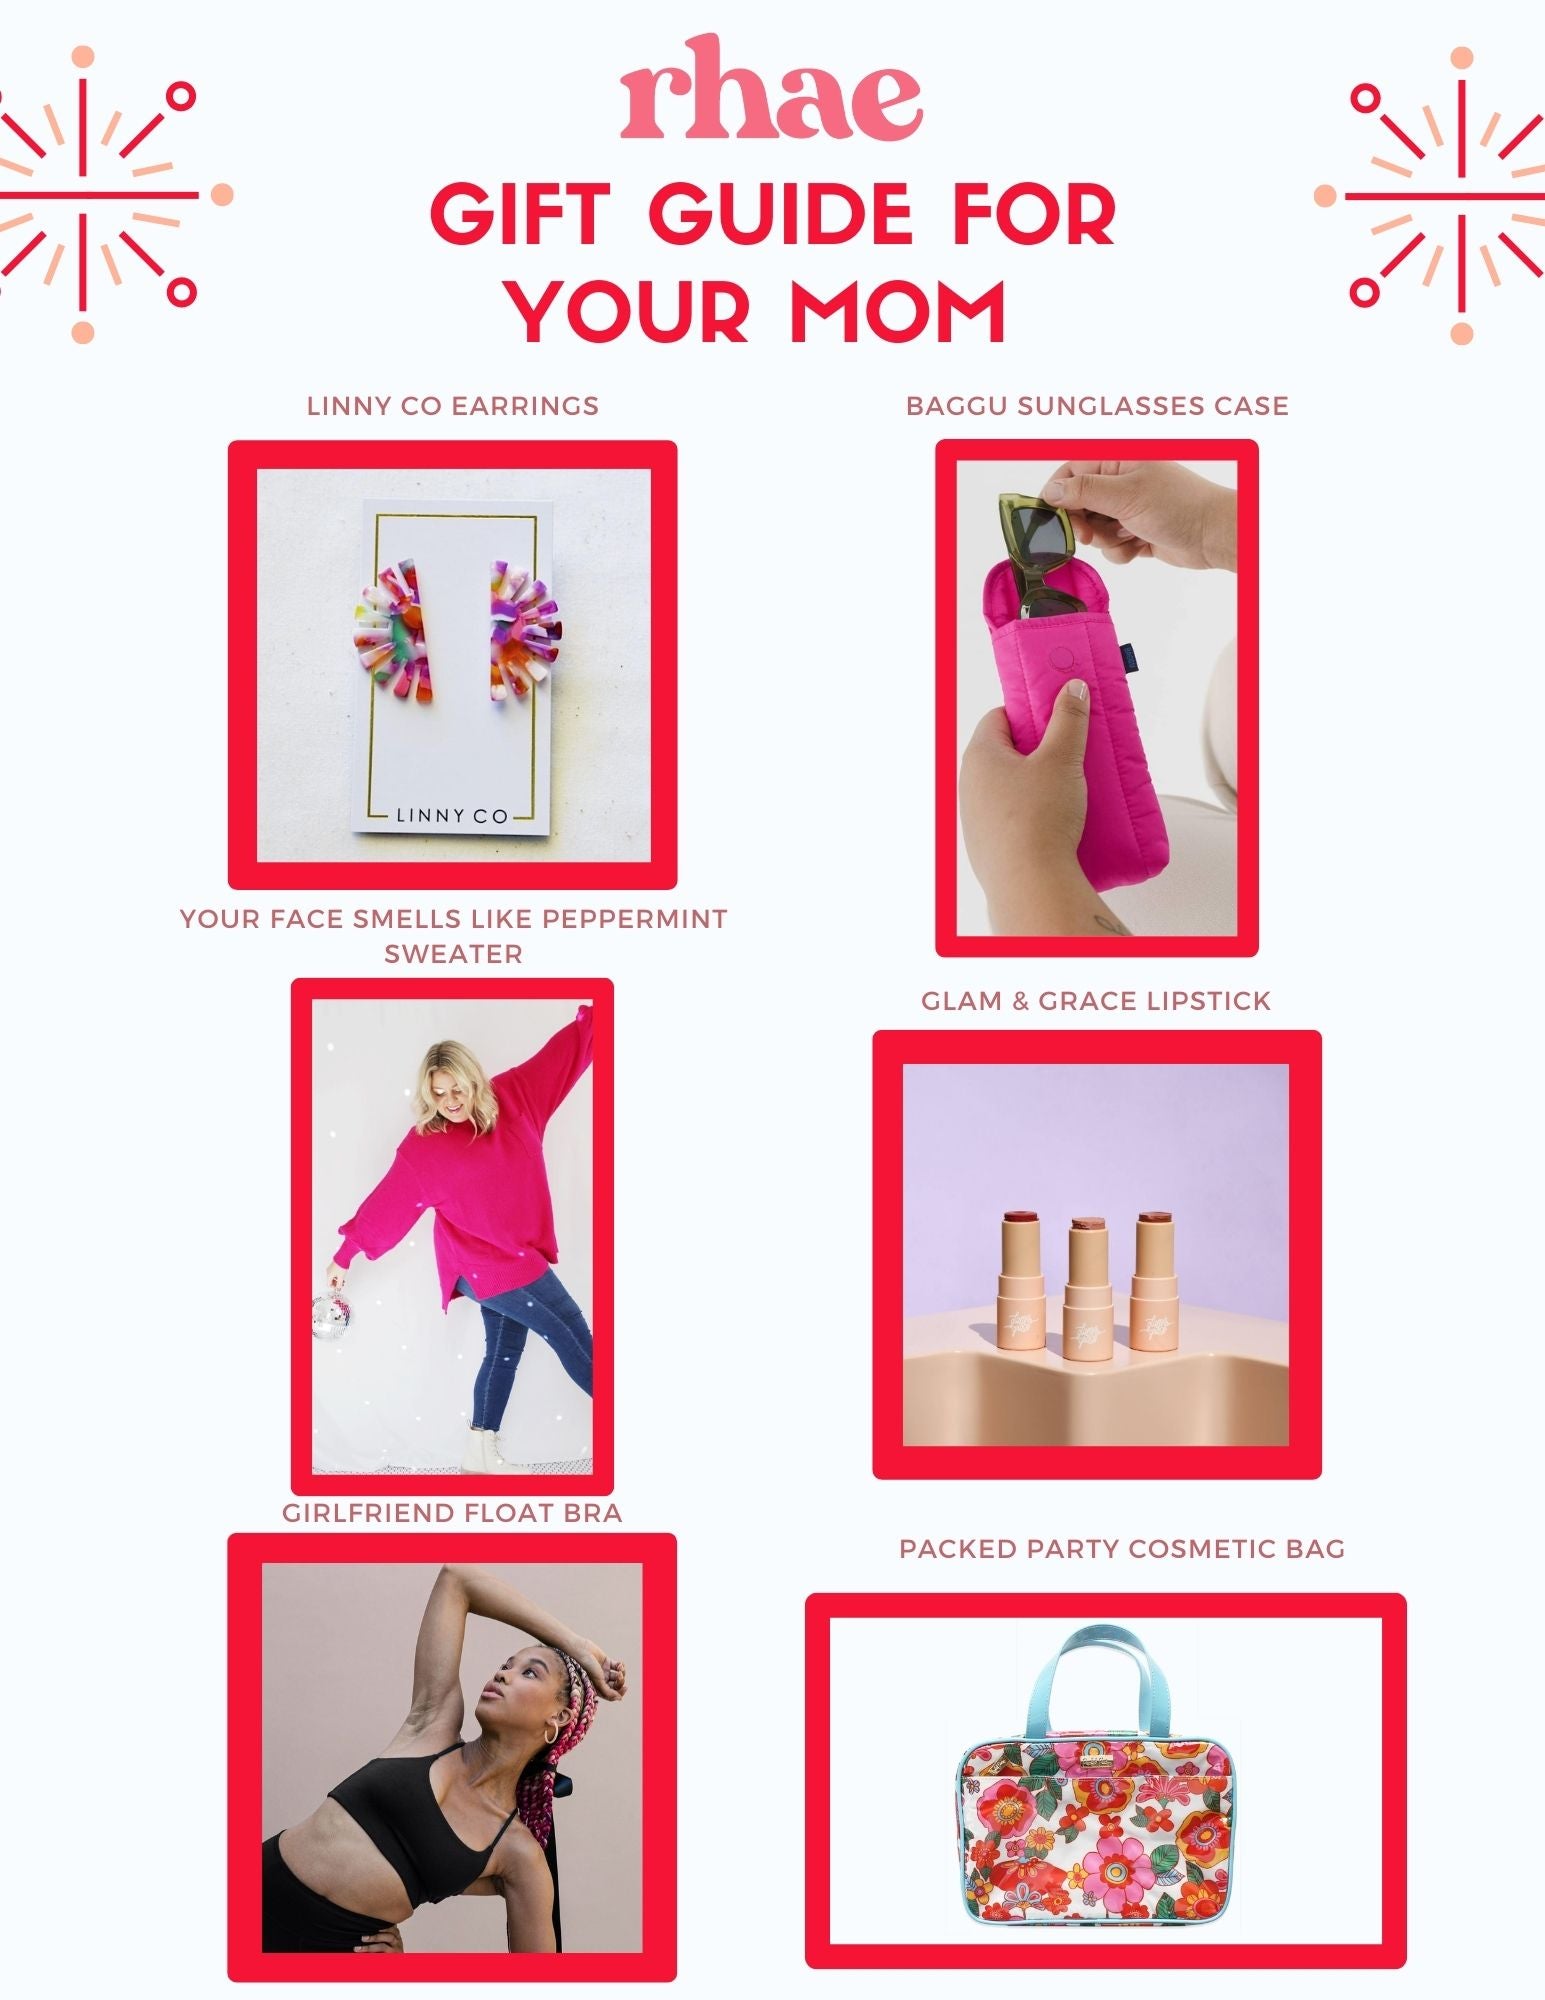 rhae gift guide for your mom